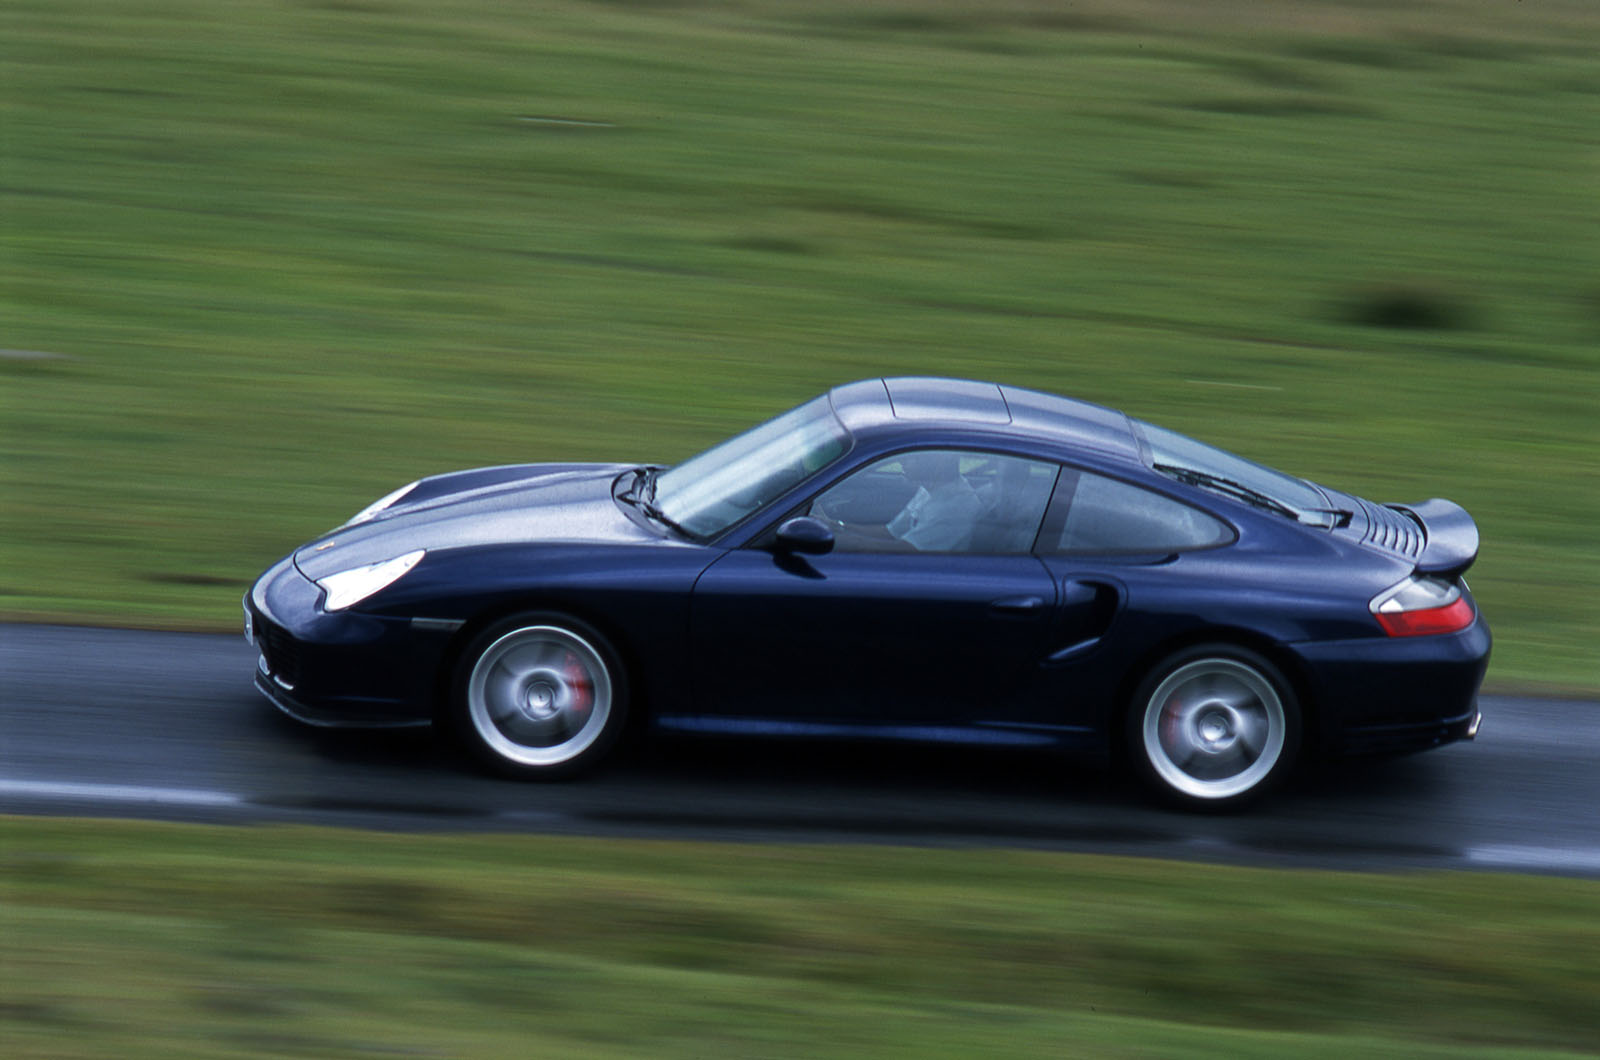 Used car buying guide: Porsche 911 | Autocar